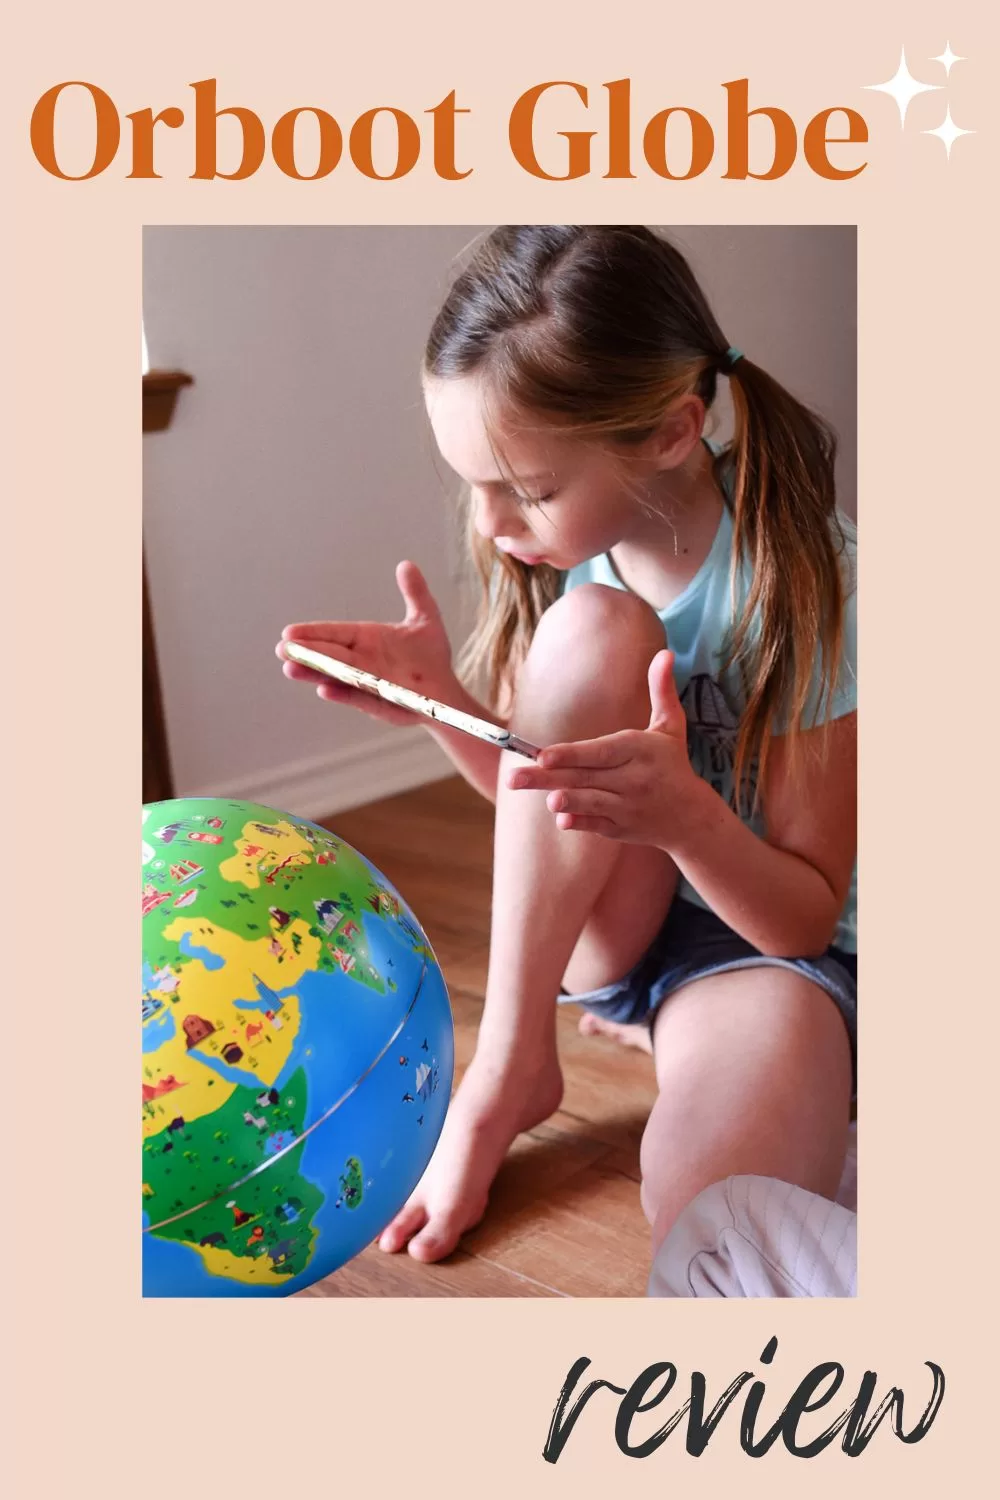 image shows a girl looking at the Orboot Educational Globe and the caption reads "Orboot Globe Review"